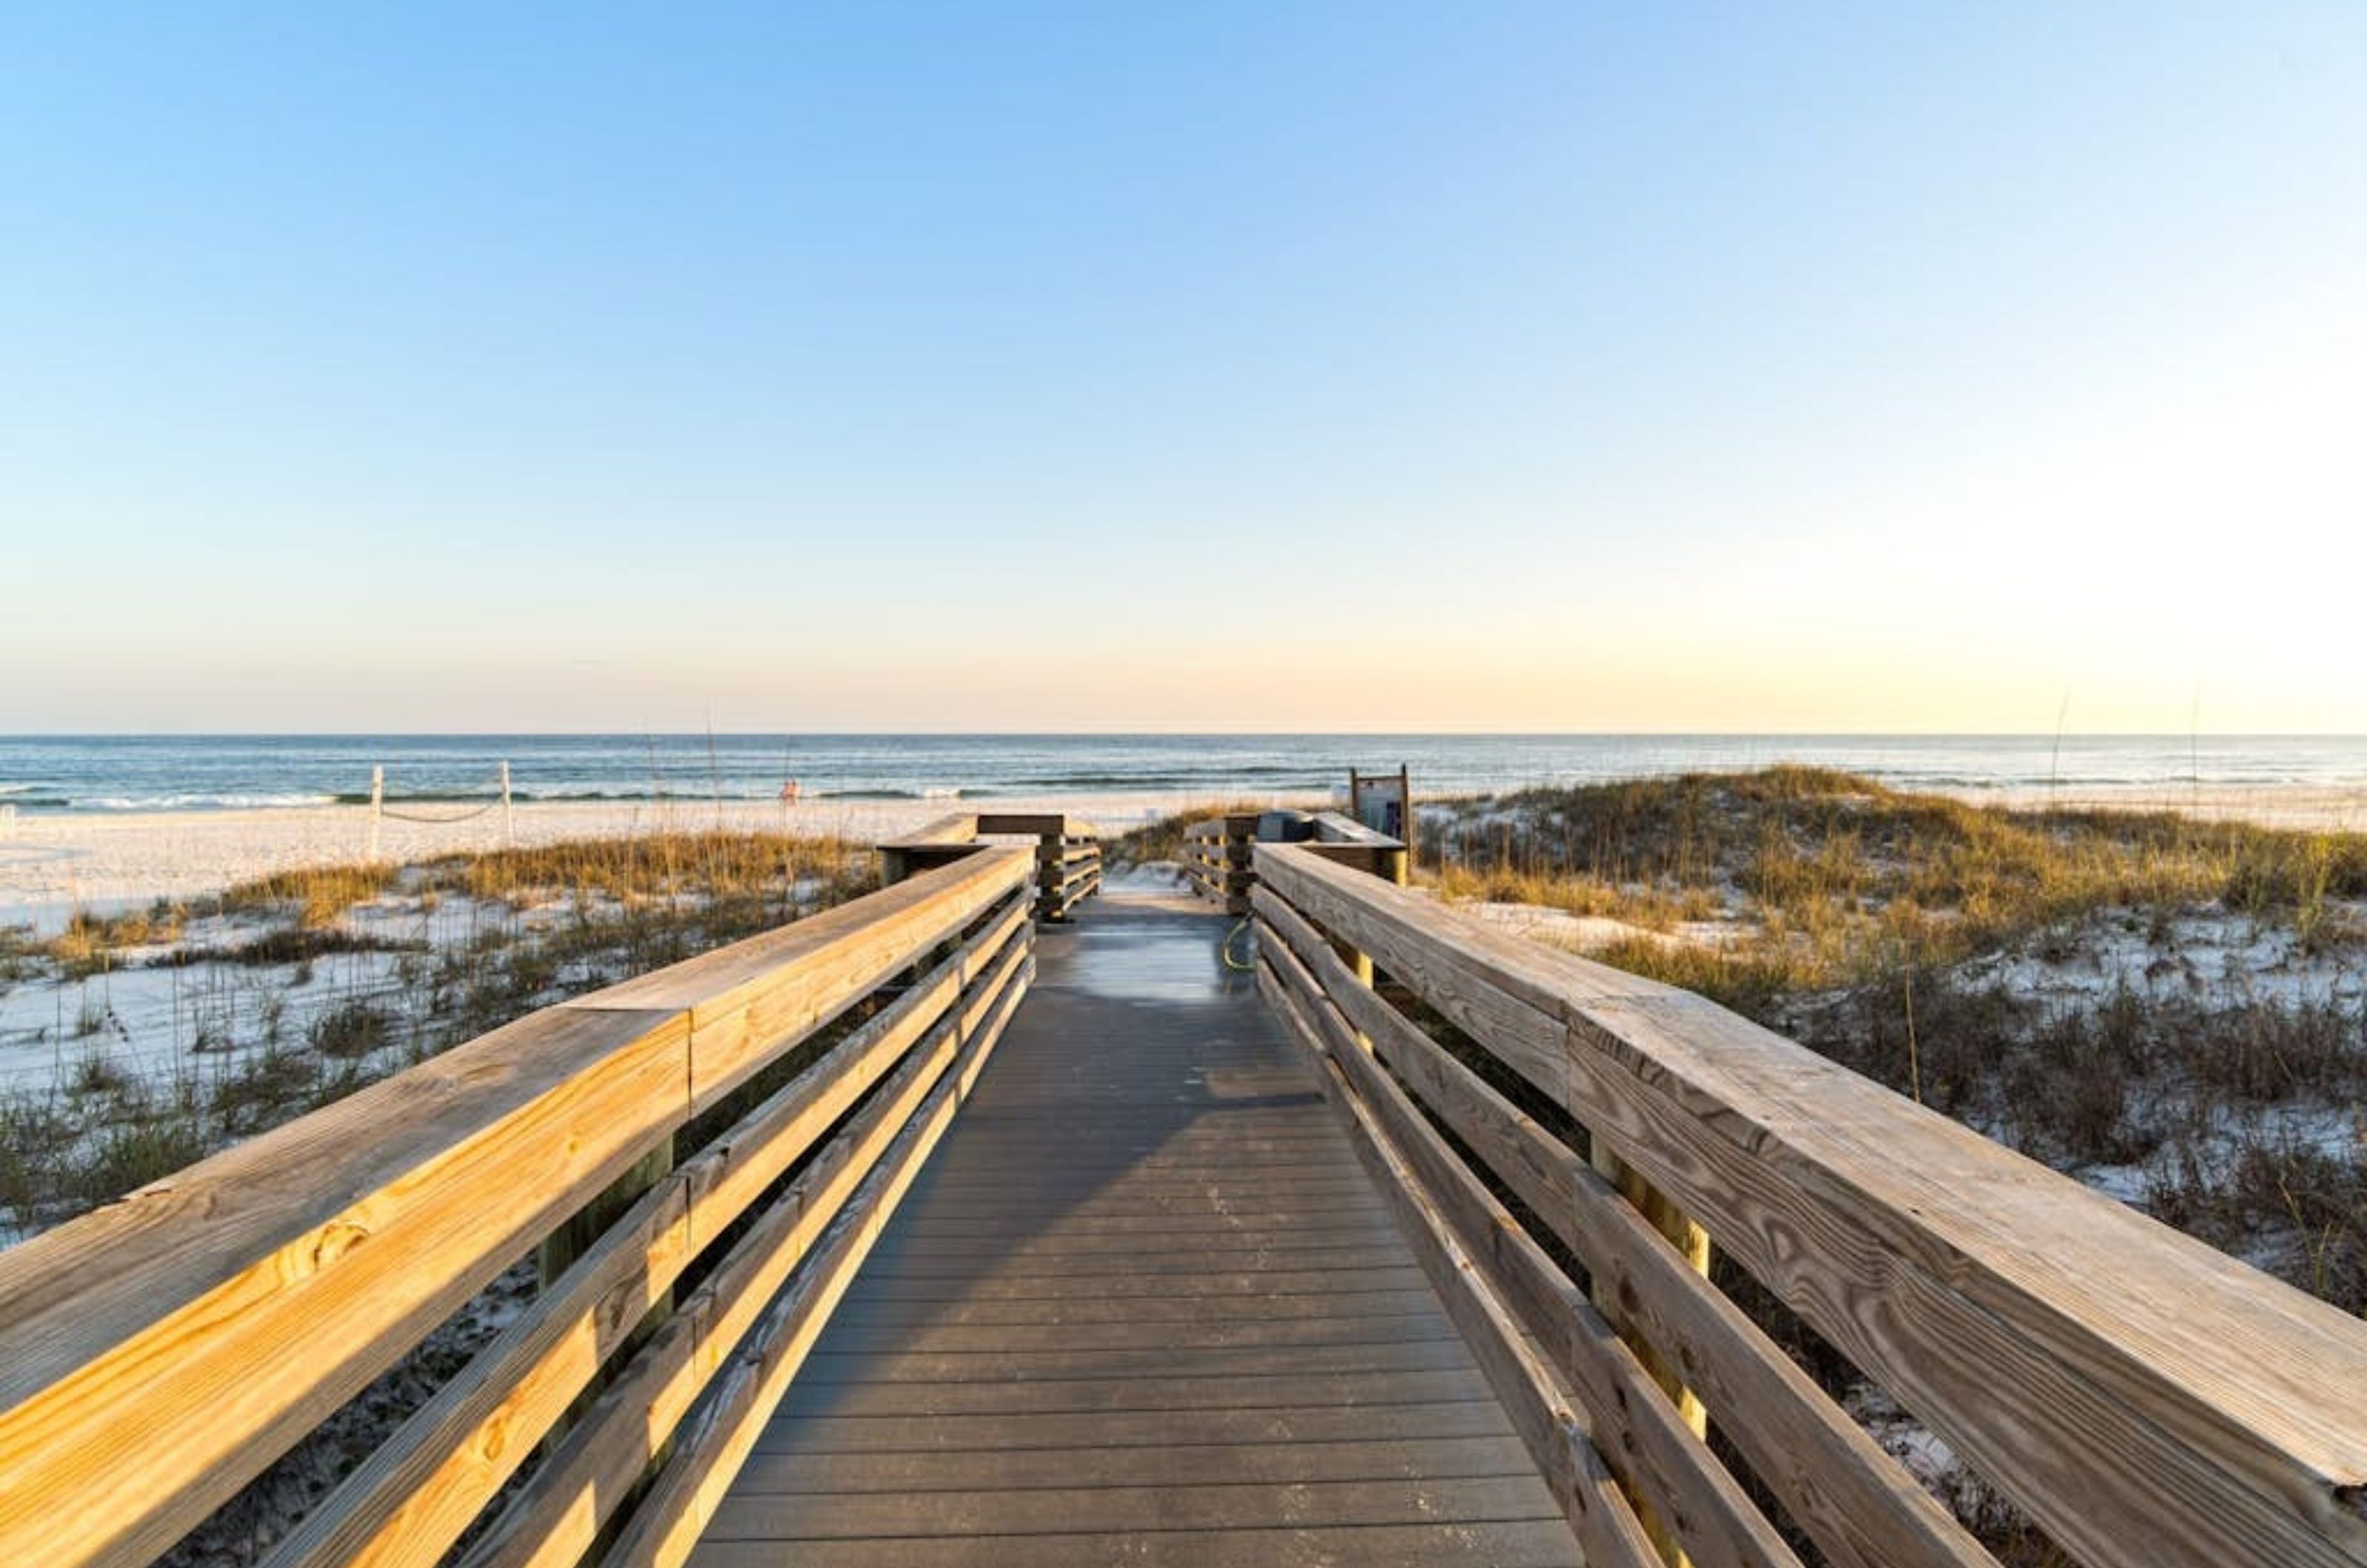 Wooden boardwalk leading to the Gulf of Mexico